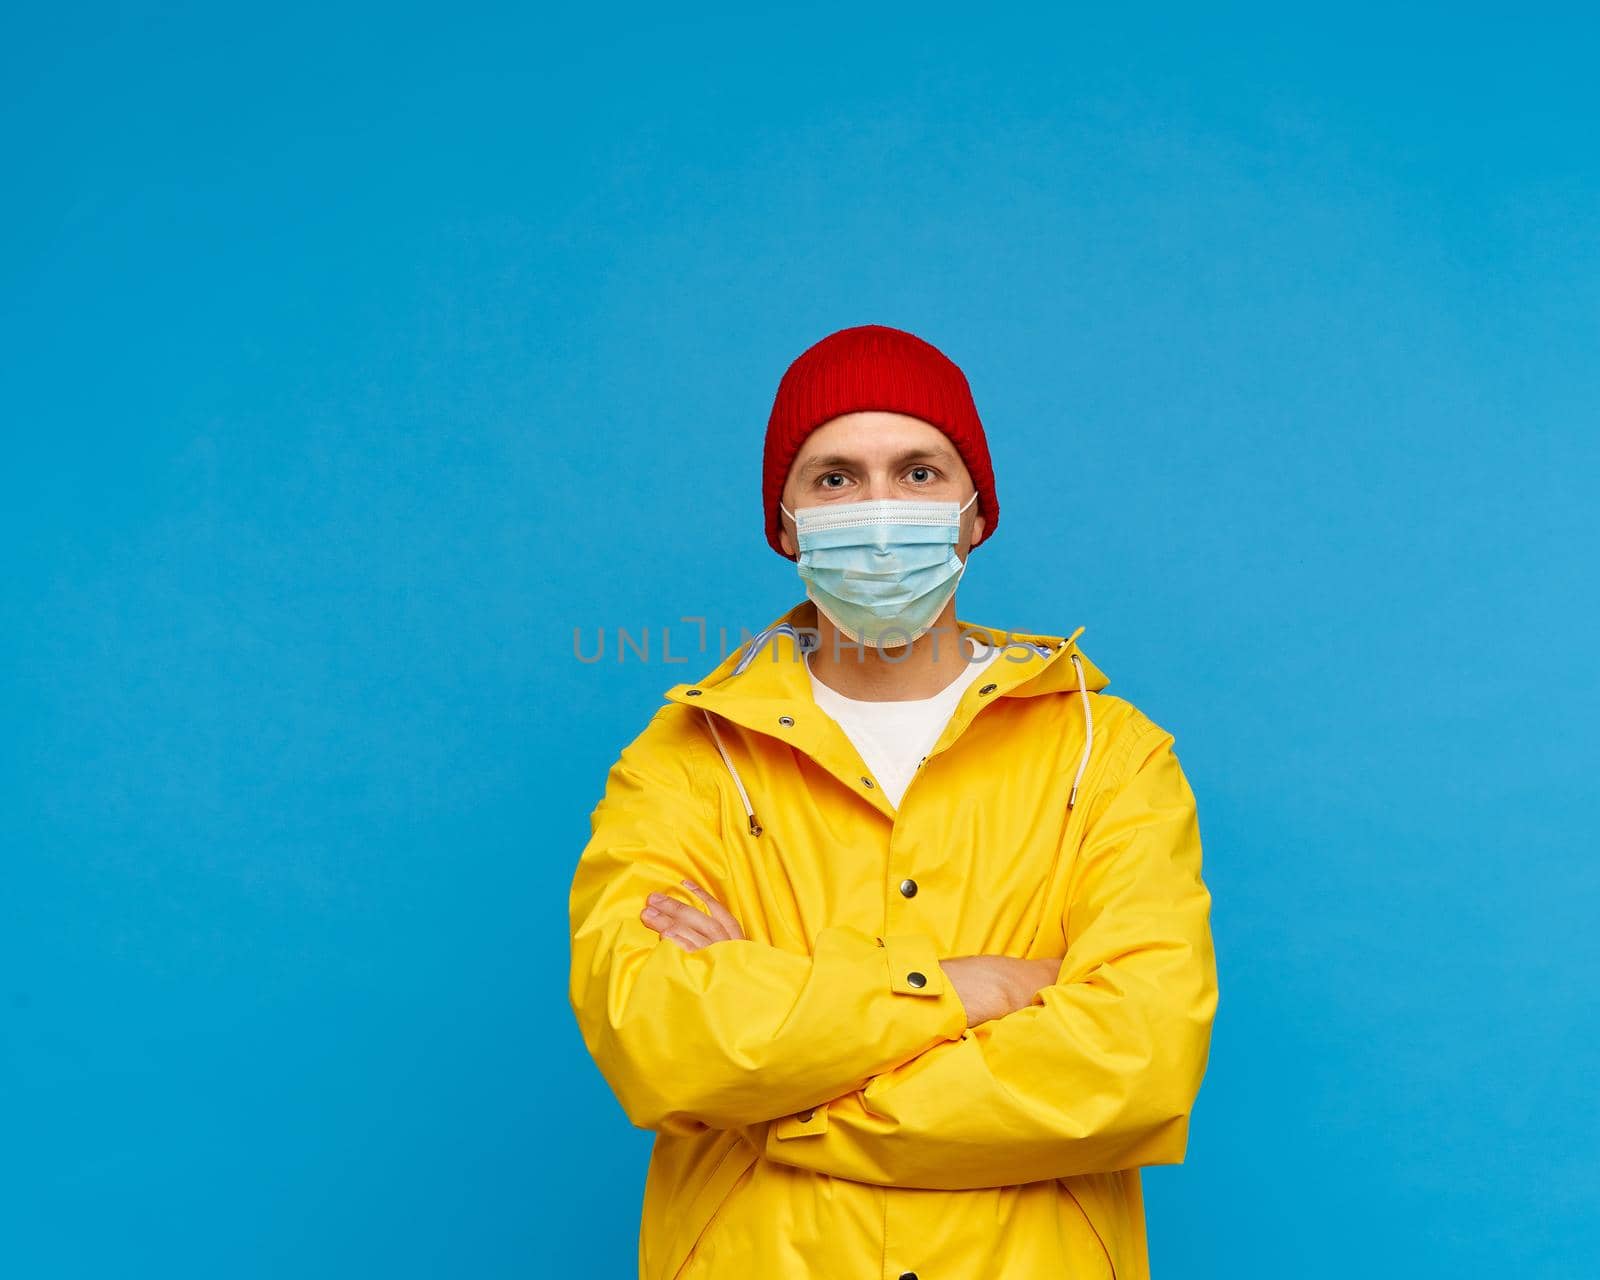 Waisted portrait of man in protective medical mask stands with his arms crossed and looks at camera. Bright blue background, yellow raincoat and red warm hat